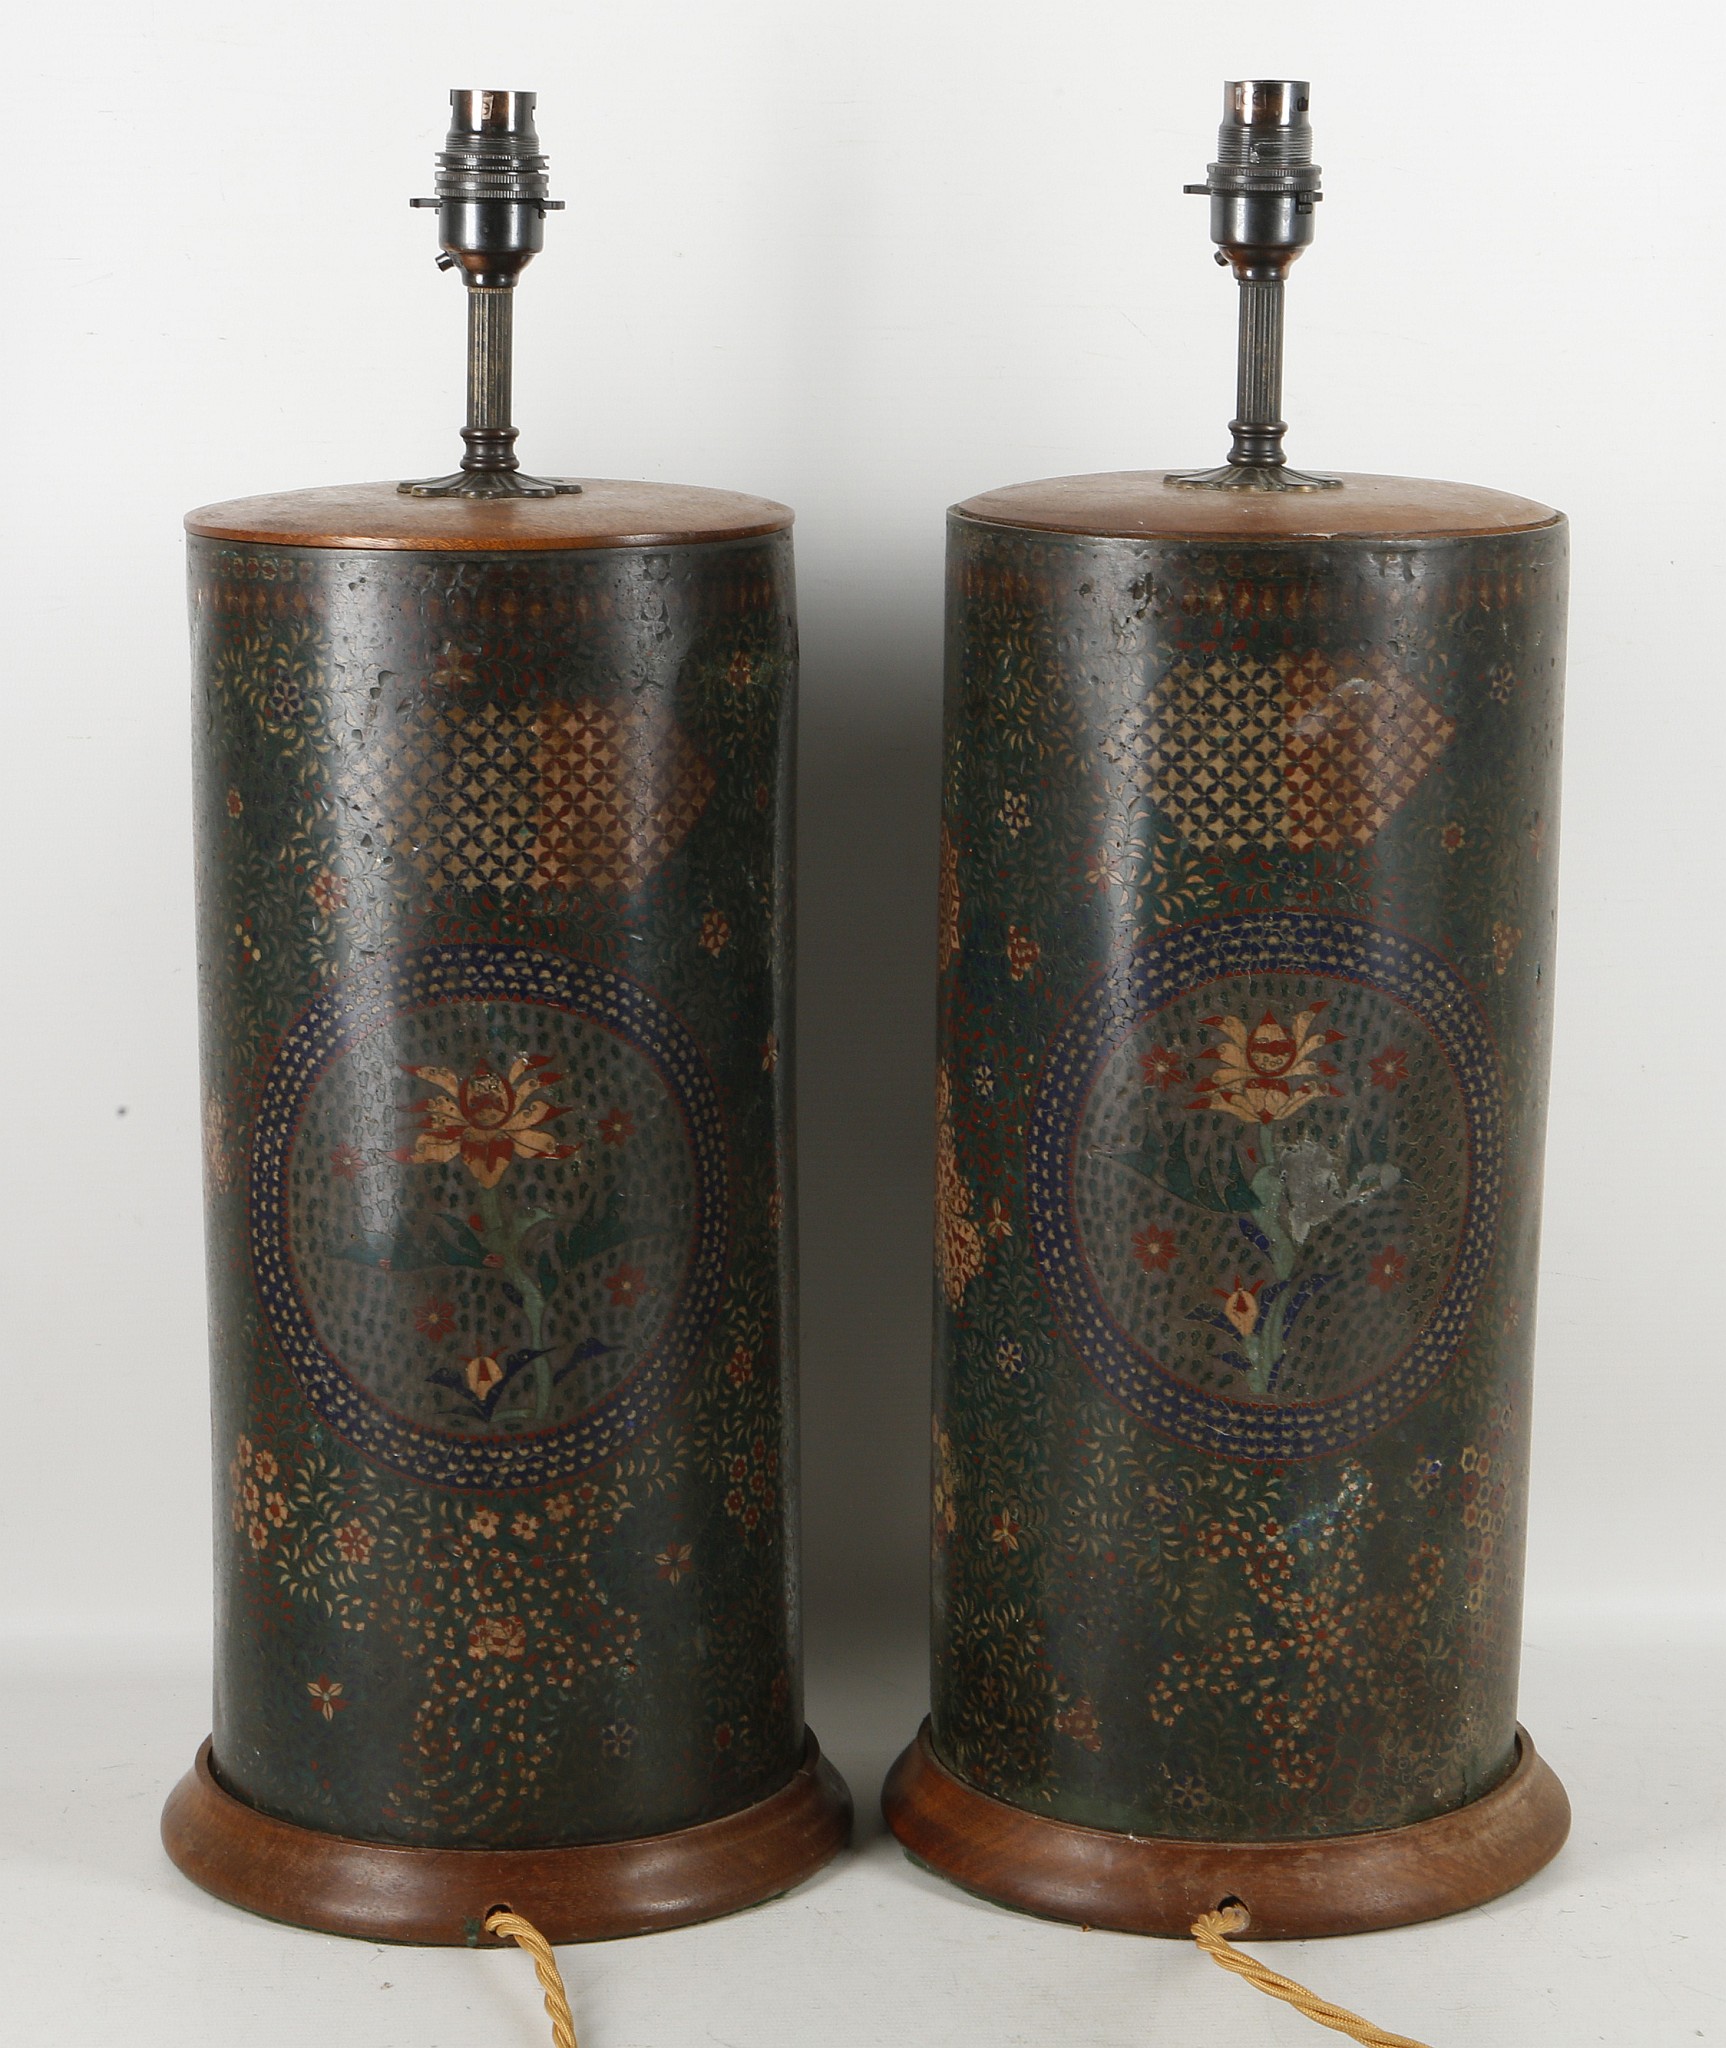 A pair of cloisonne cylinders now formed as table lamps, floral and geometric patterns, 39cm high. - Image 2 of 2